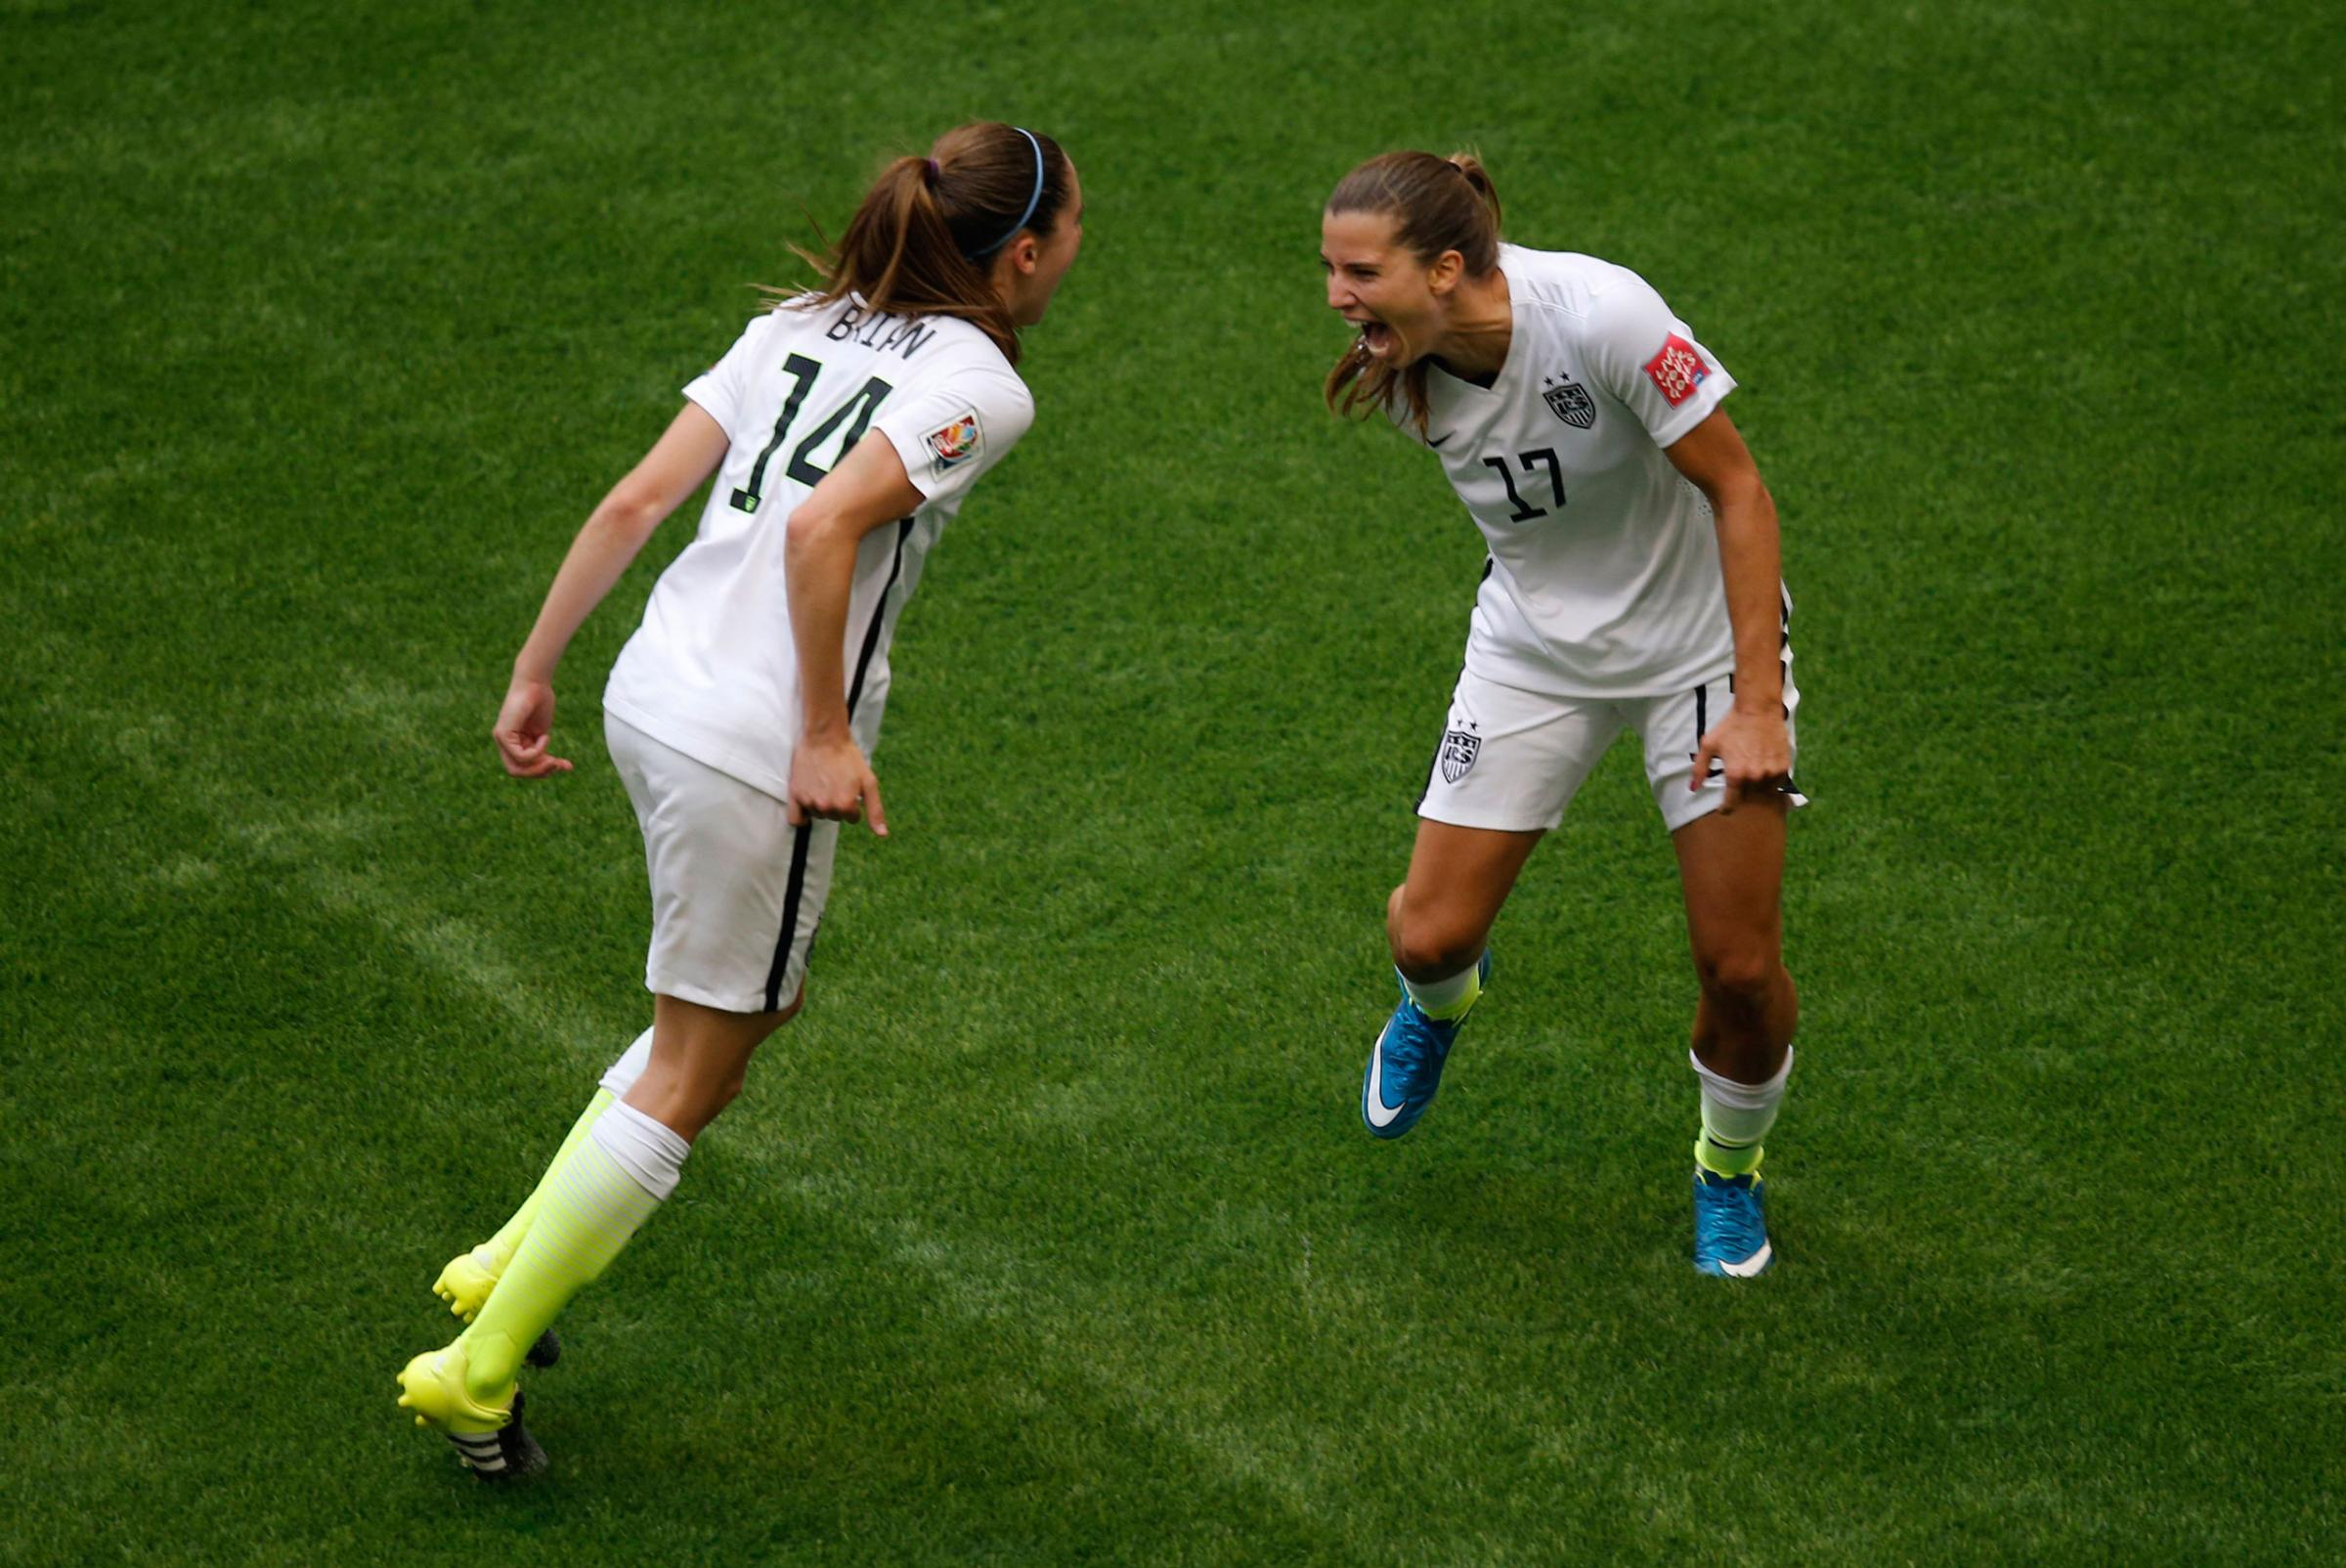 Jul 5, 2015; Vancouver, British Columbia, CAN; United States midfielder Tobin Heath (17) celebrates with midfielder Morgan Brian (14) after scoring against Japan during the second half of the final of the FIFA 2015 Women's World Cup at BC Place Stadium. Mandatory Credit: Erich Schlegel-USA TODAY Sports